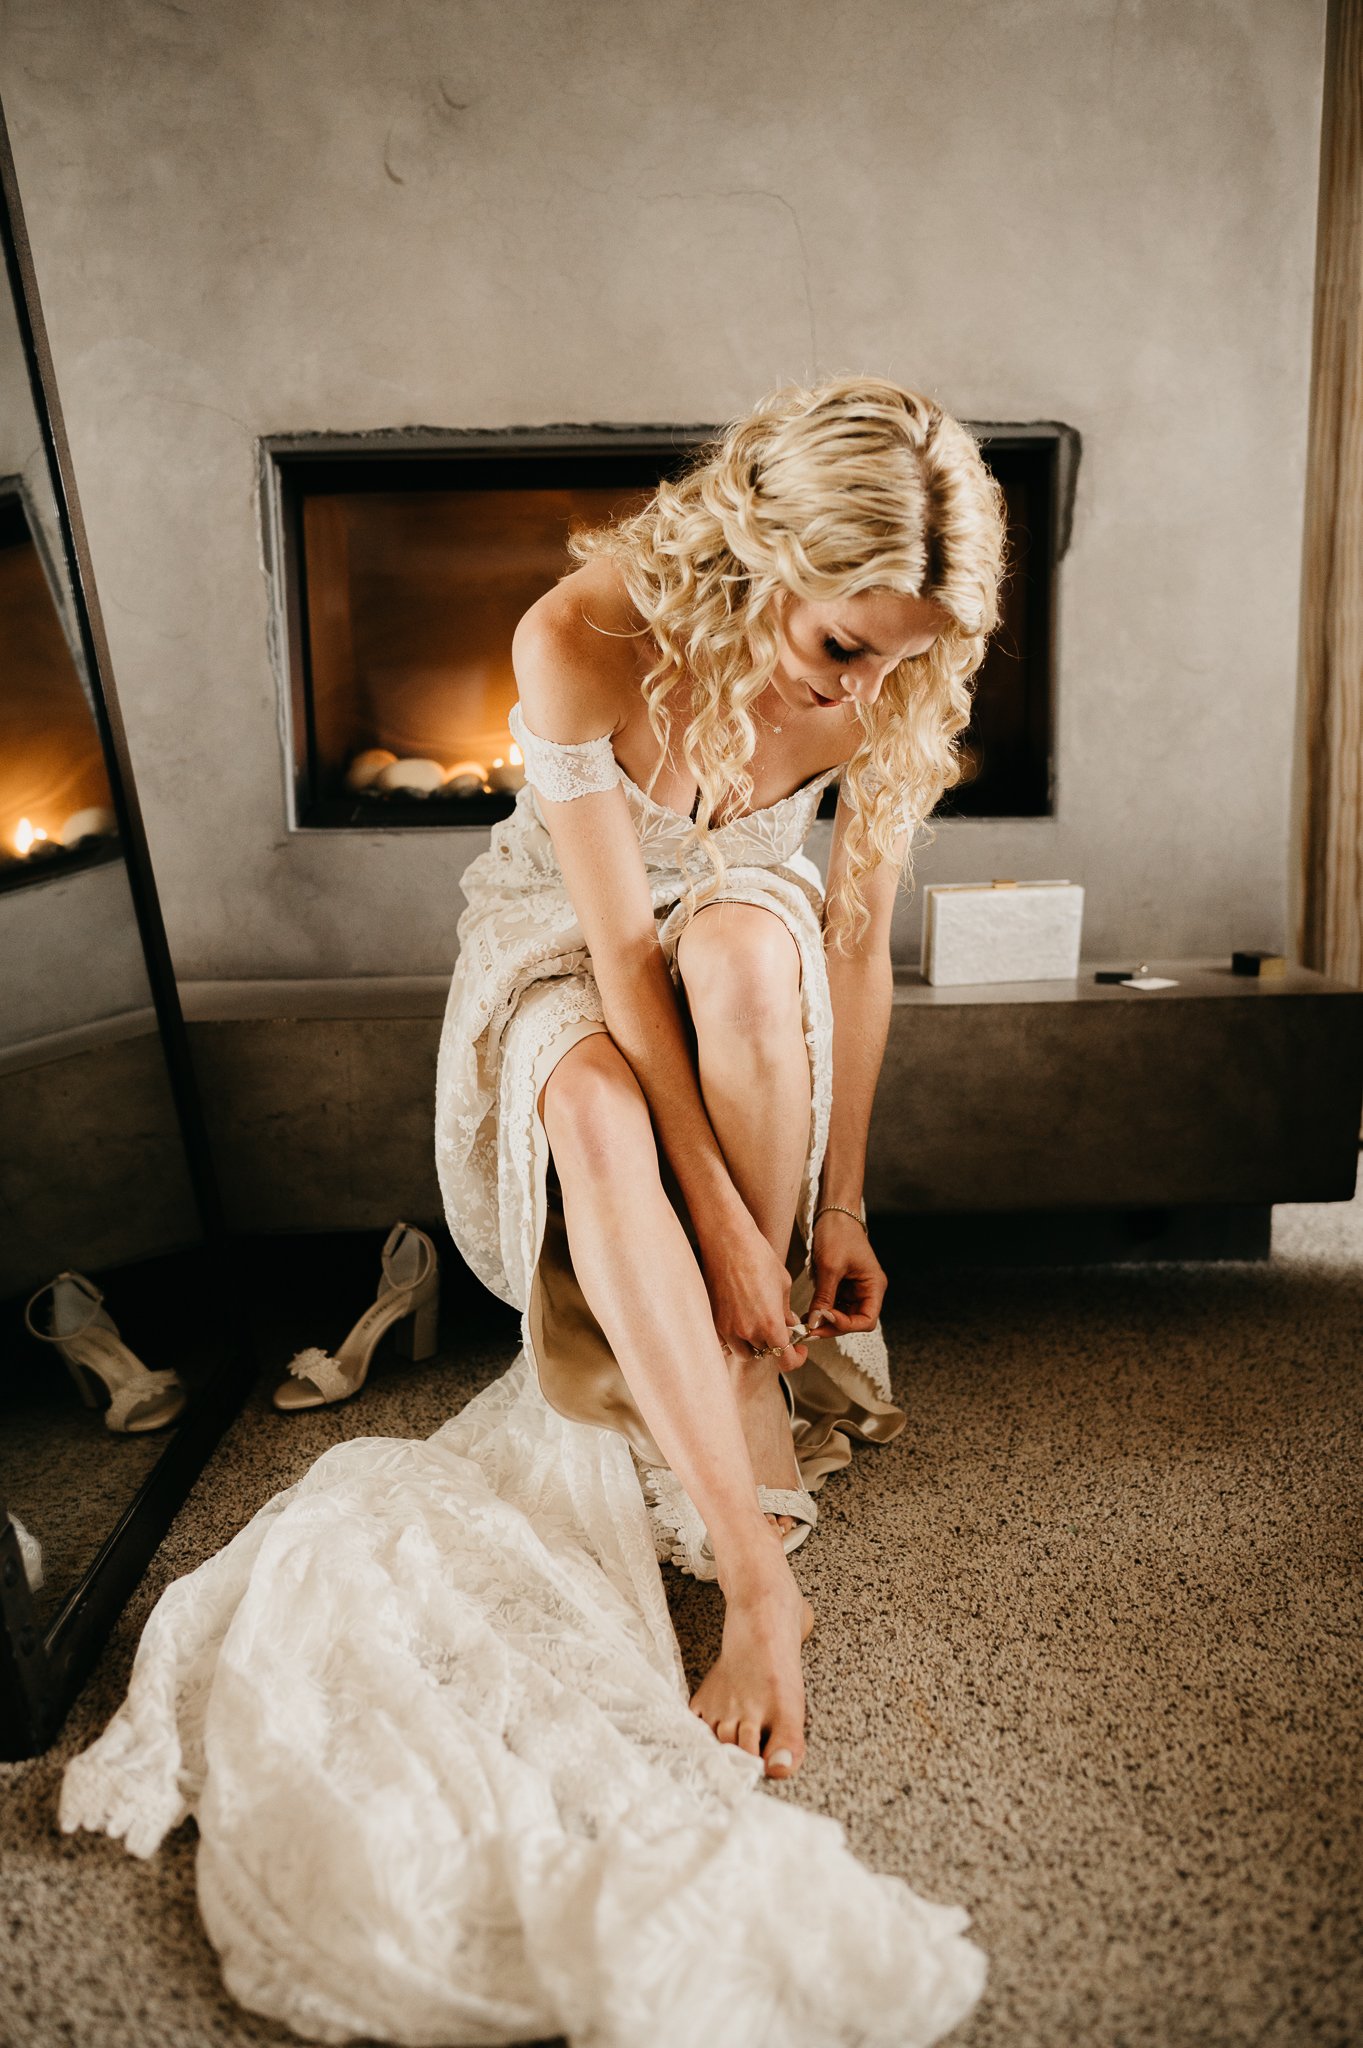 Bride at Wind and Sea Estate Big Sur, California in wedding dress putting on her shoes before ceremony